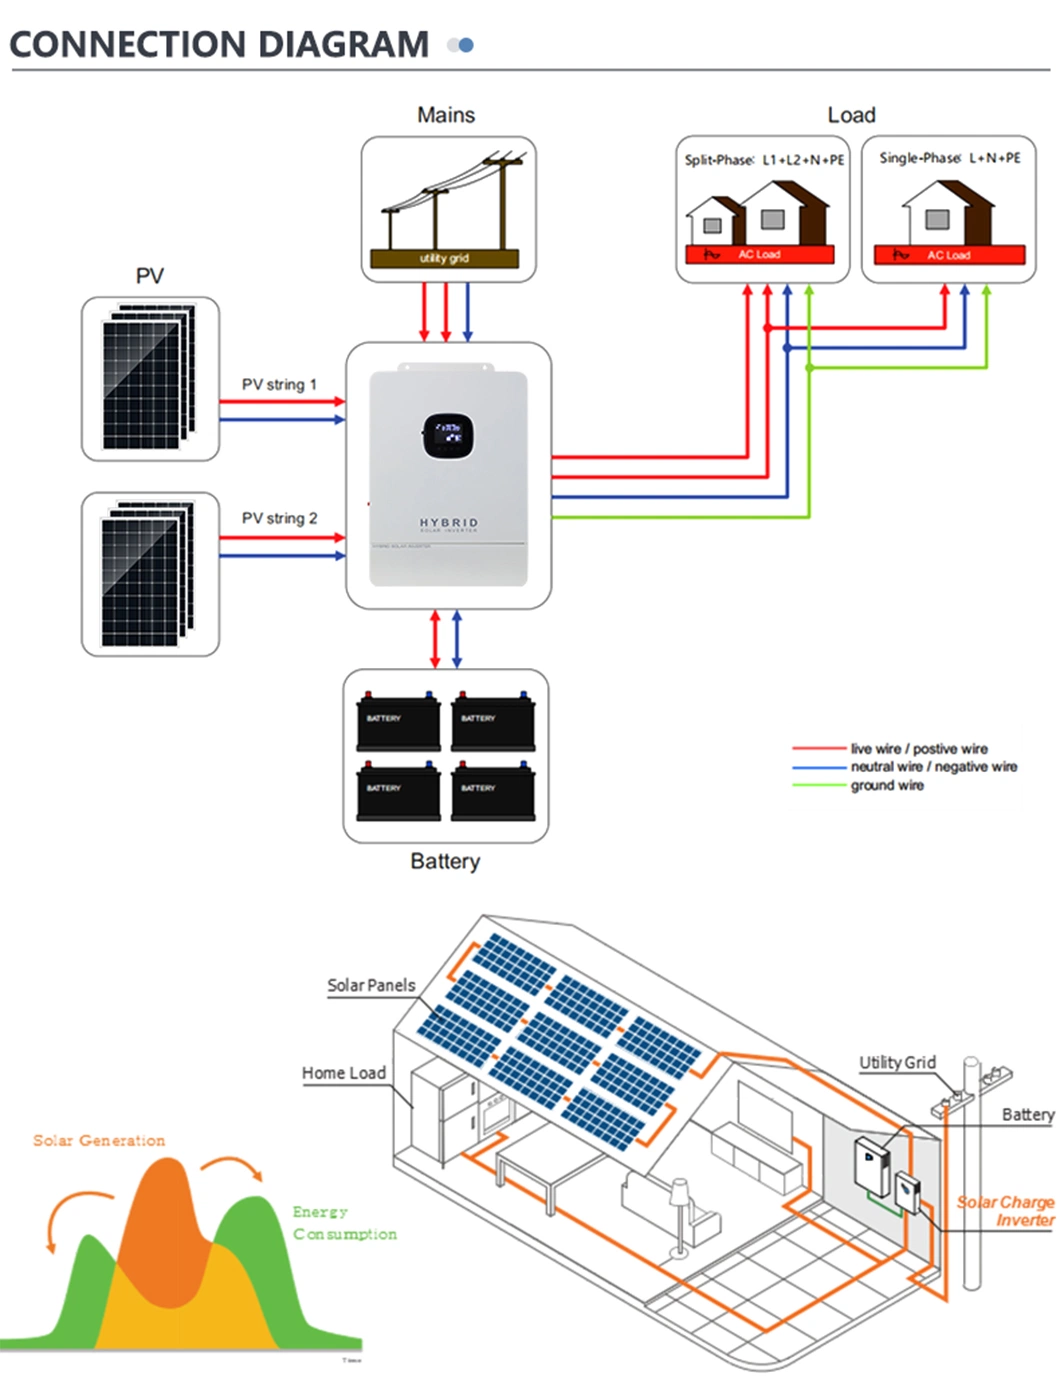 Solarthon Industry 5000 Watt Panels 20kw Set 2kw Panel for Home with APP Solar System